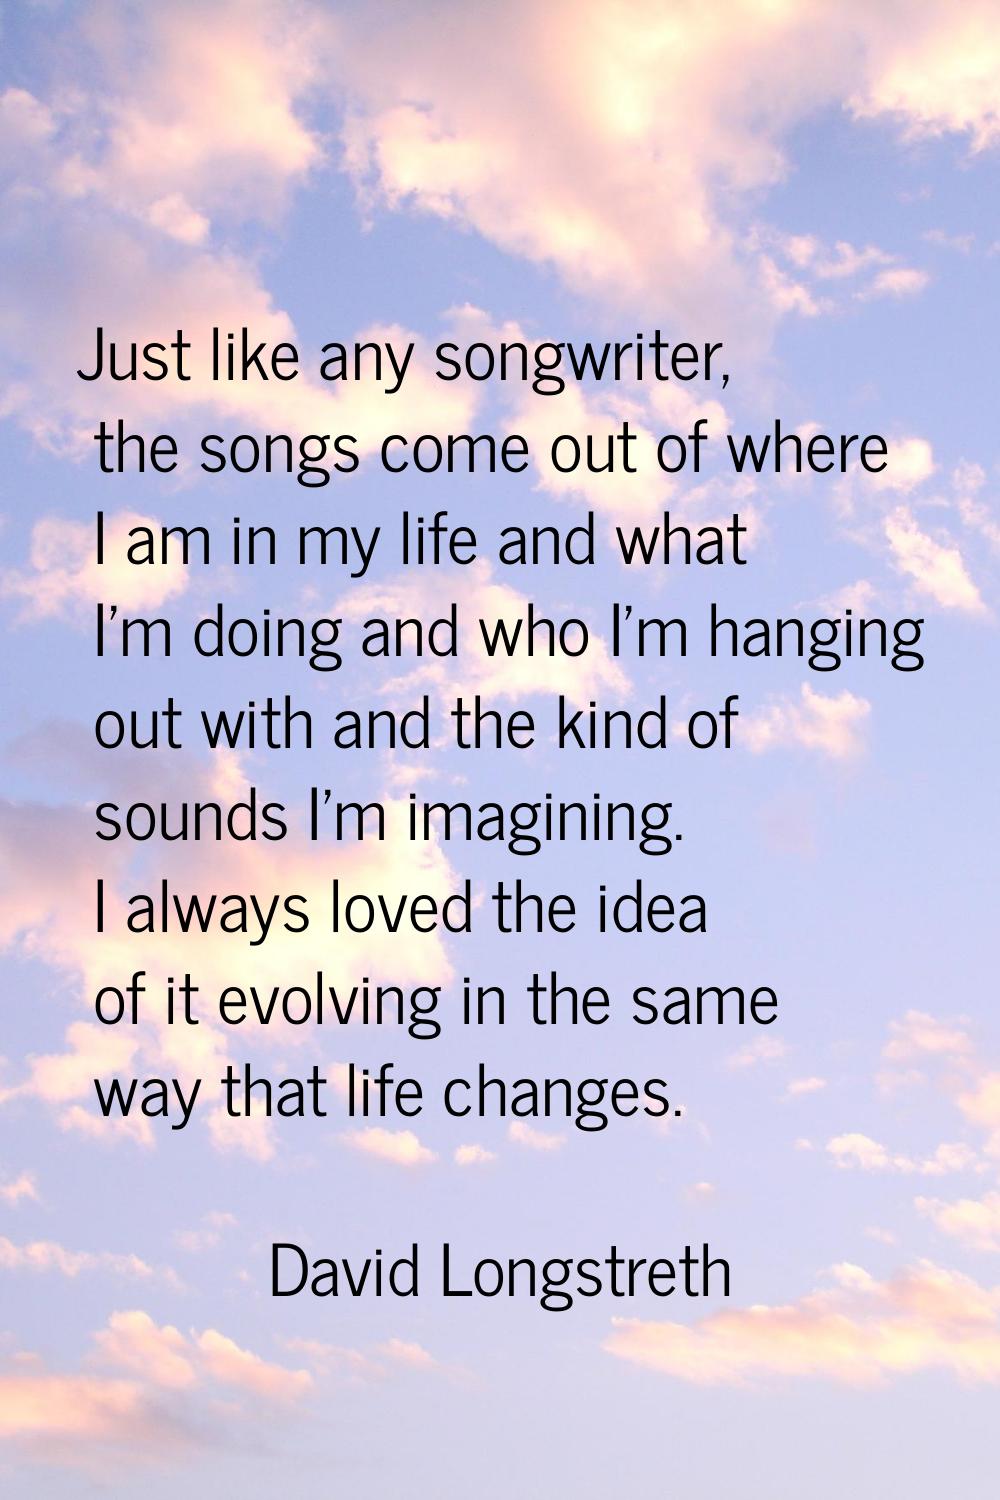 Just like any songwriter, the songs come out of where I am in my life and what I'm doing and who I'